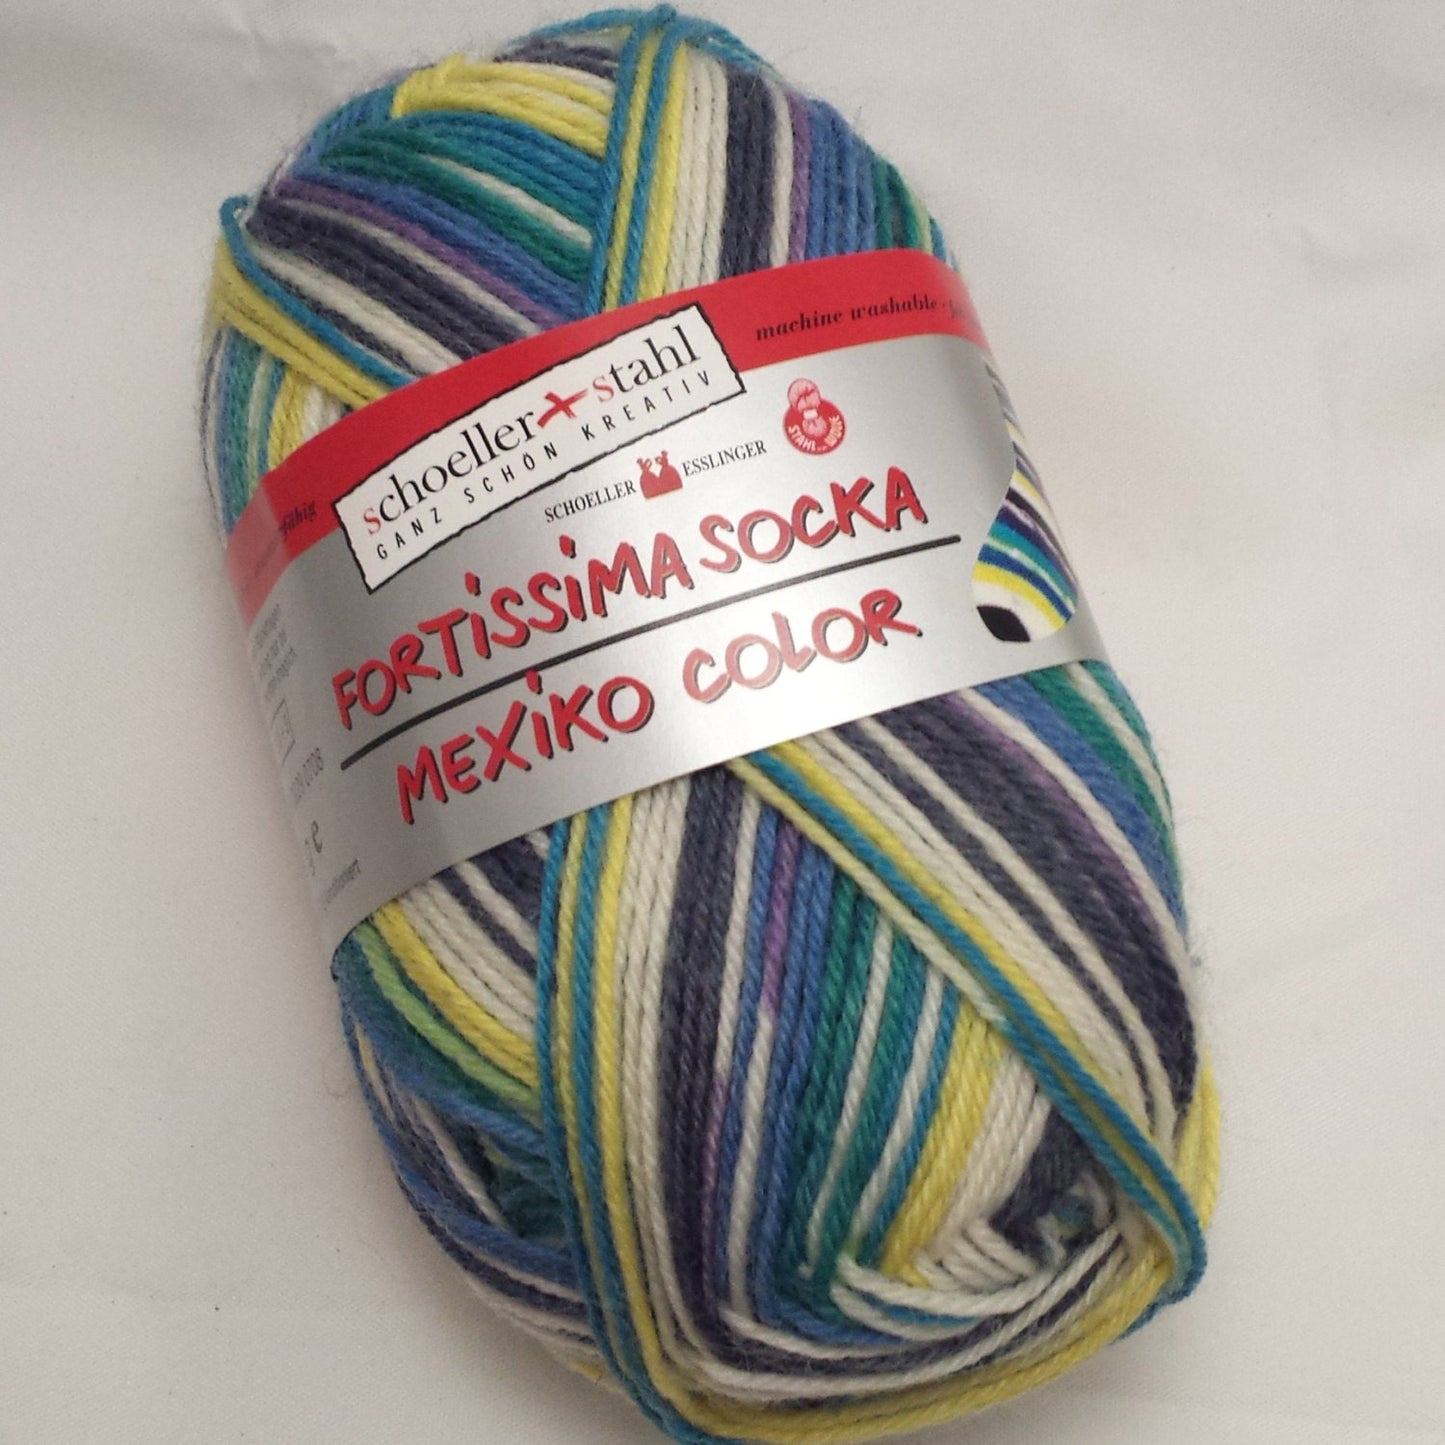 Sock Yarn - Self Patterning. 50g ball of Schoeller and Stahl Fortissima Socka Mexiko Kids Color 039. FREE sock pattern. Wool Polyamide mix